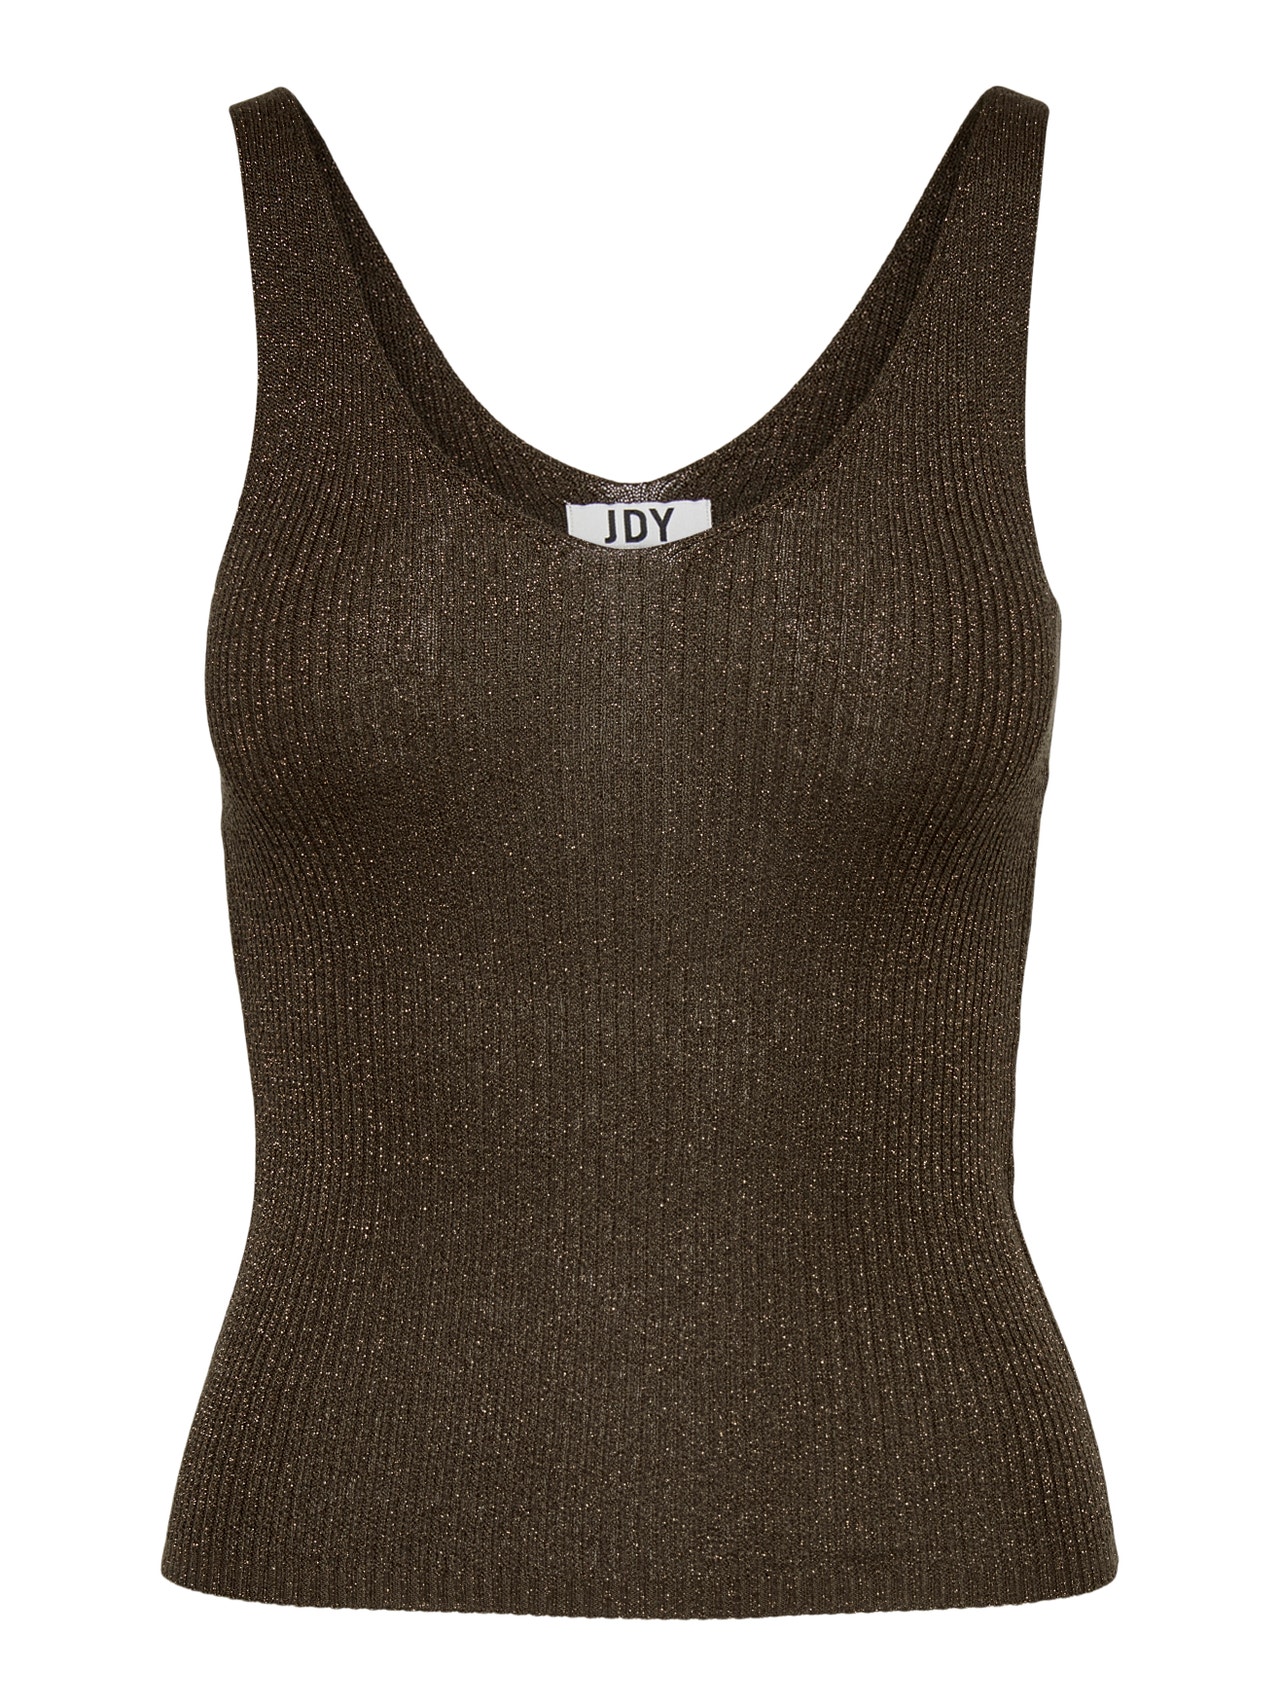 ONLY Knit Fit V-Neck Pullover -Chocolate Brown - 15216492